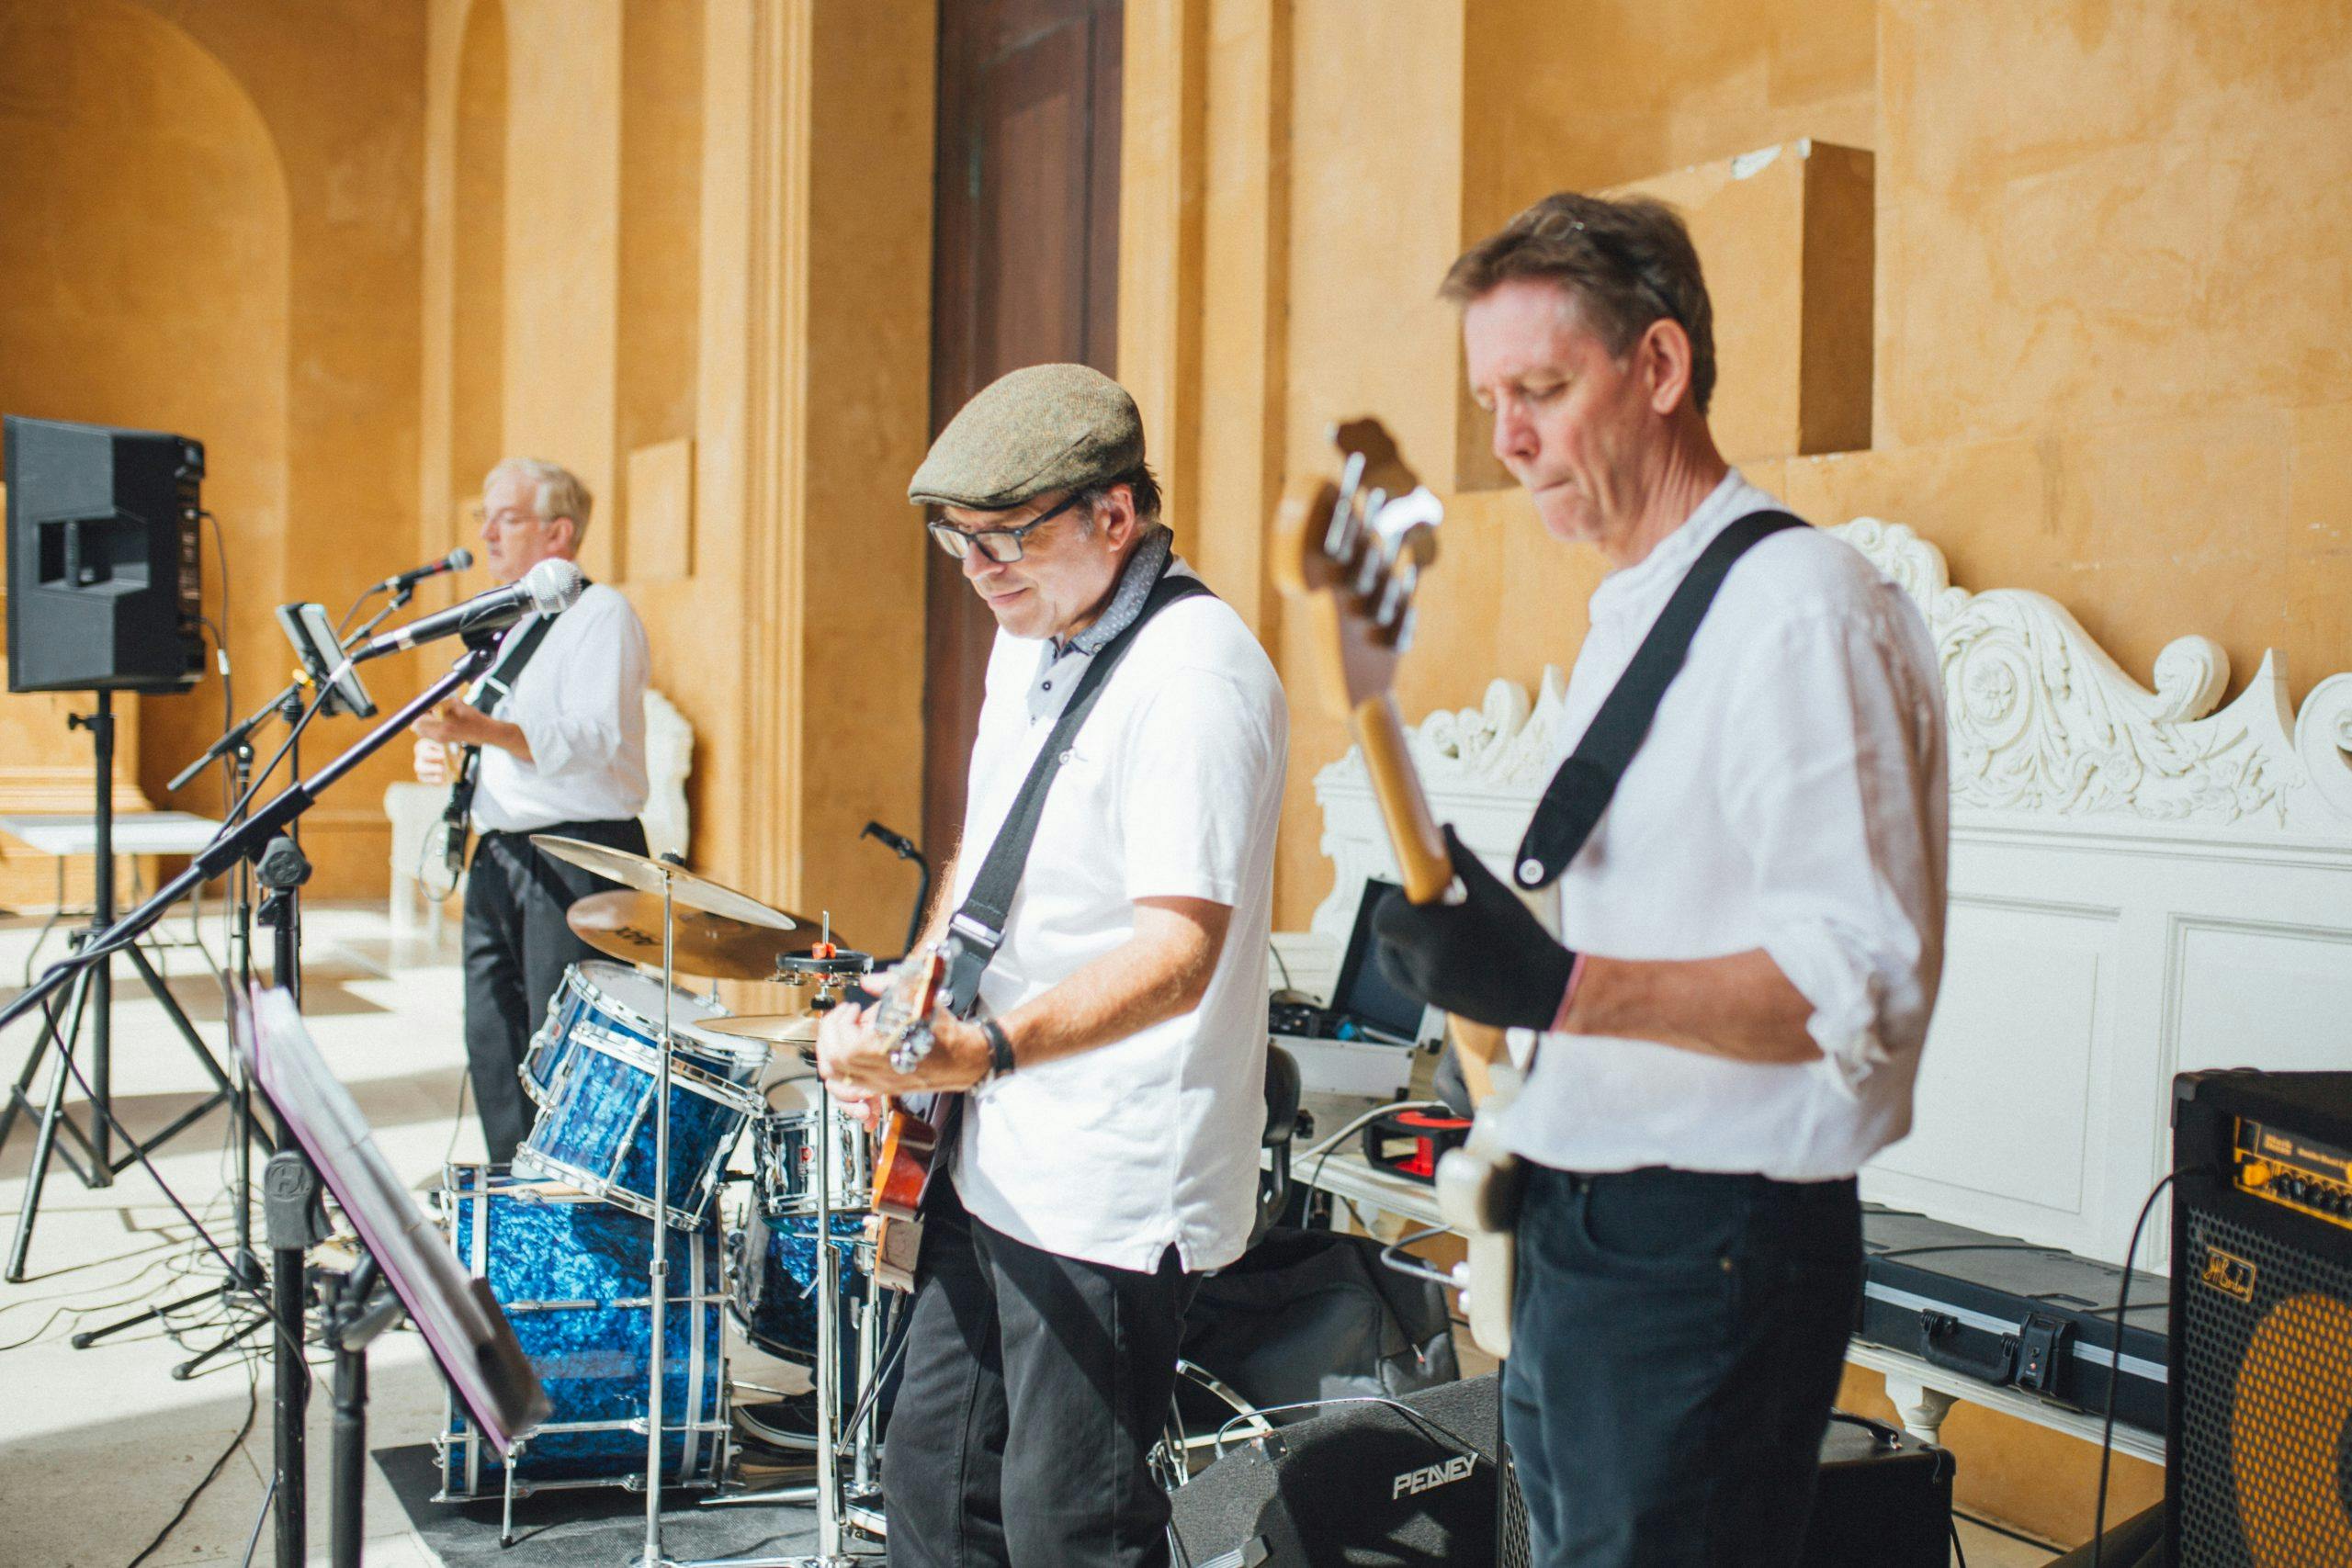 Band plays at the Festival of the Unexceptional